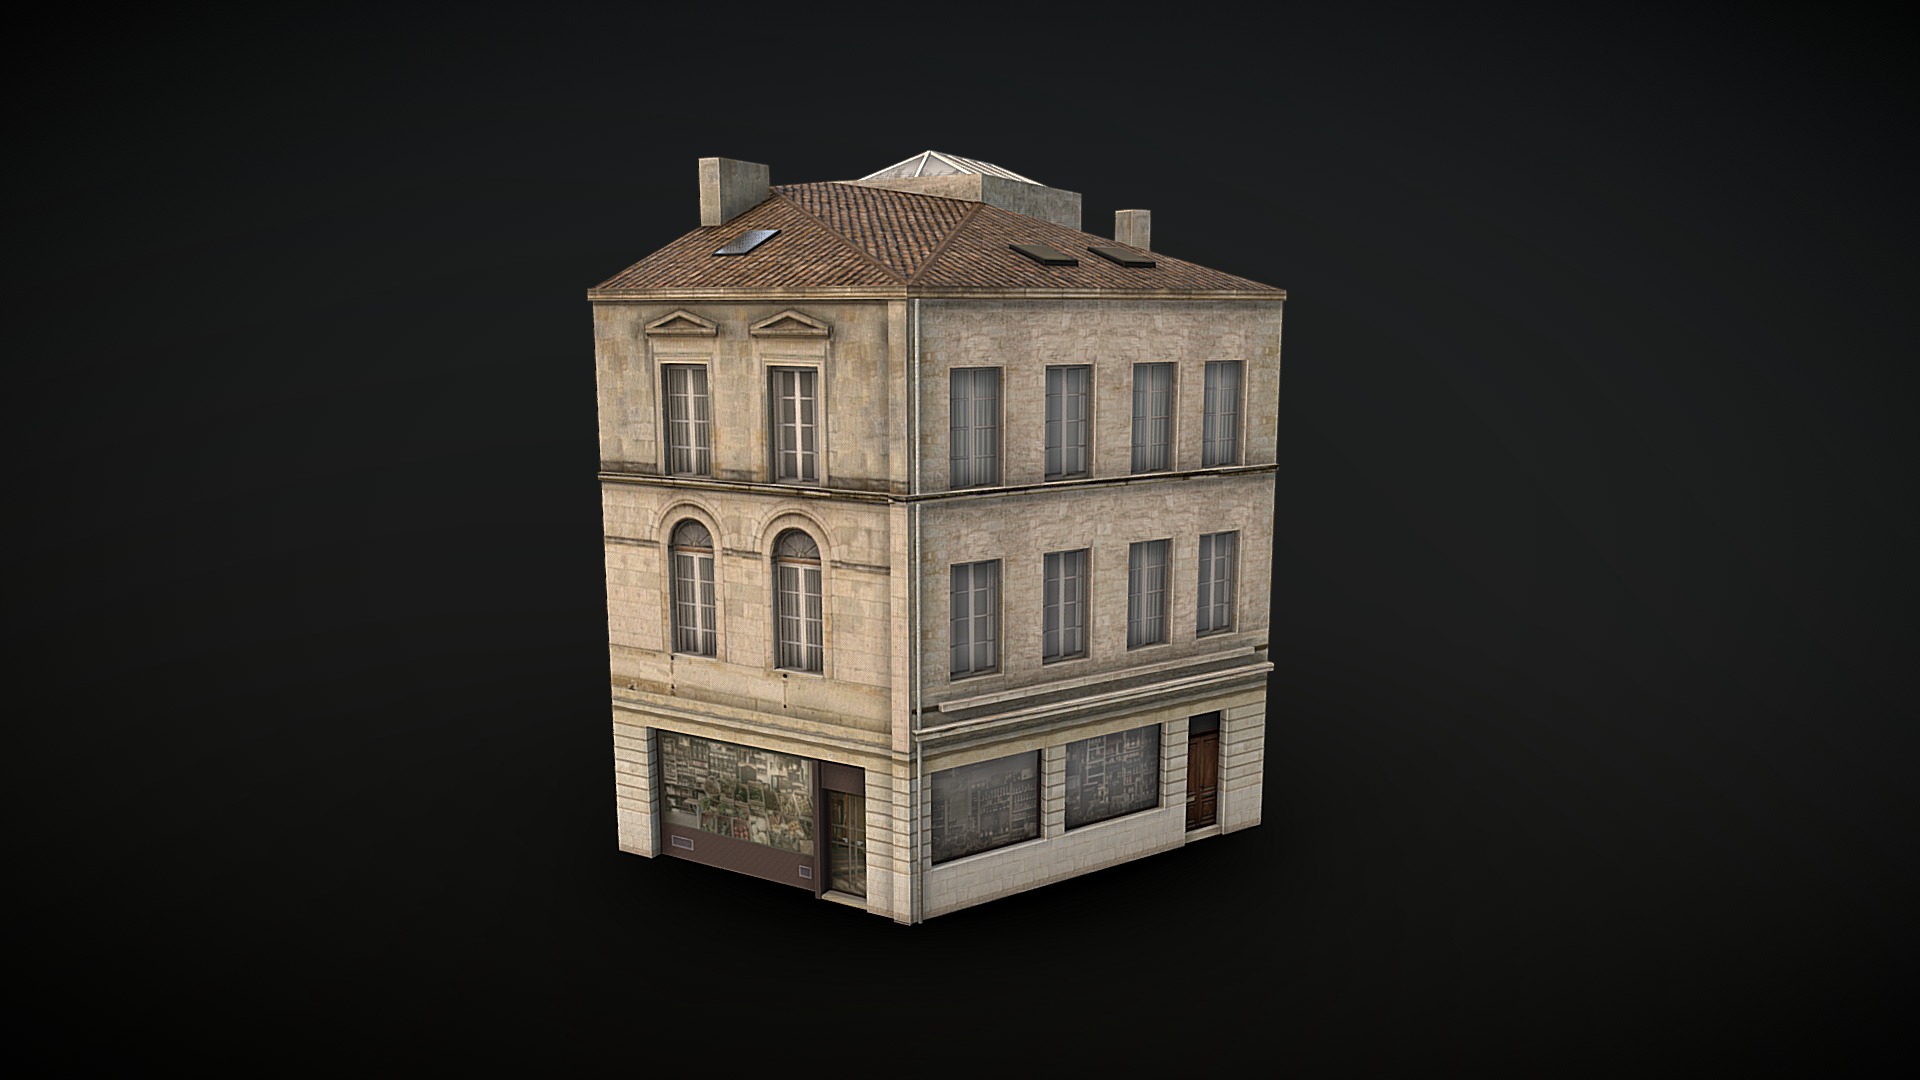 3D model Thiers corner #3 - This is a 3D model of the Thiers corner #3. The 3D model is about a building with a tower.